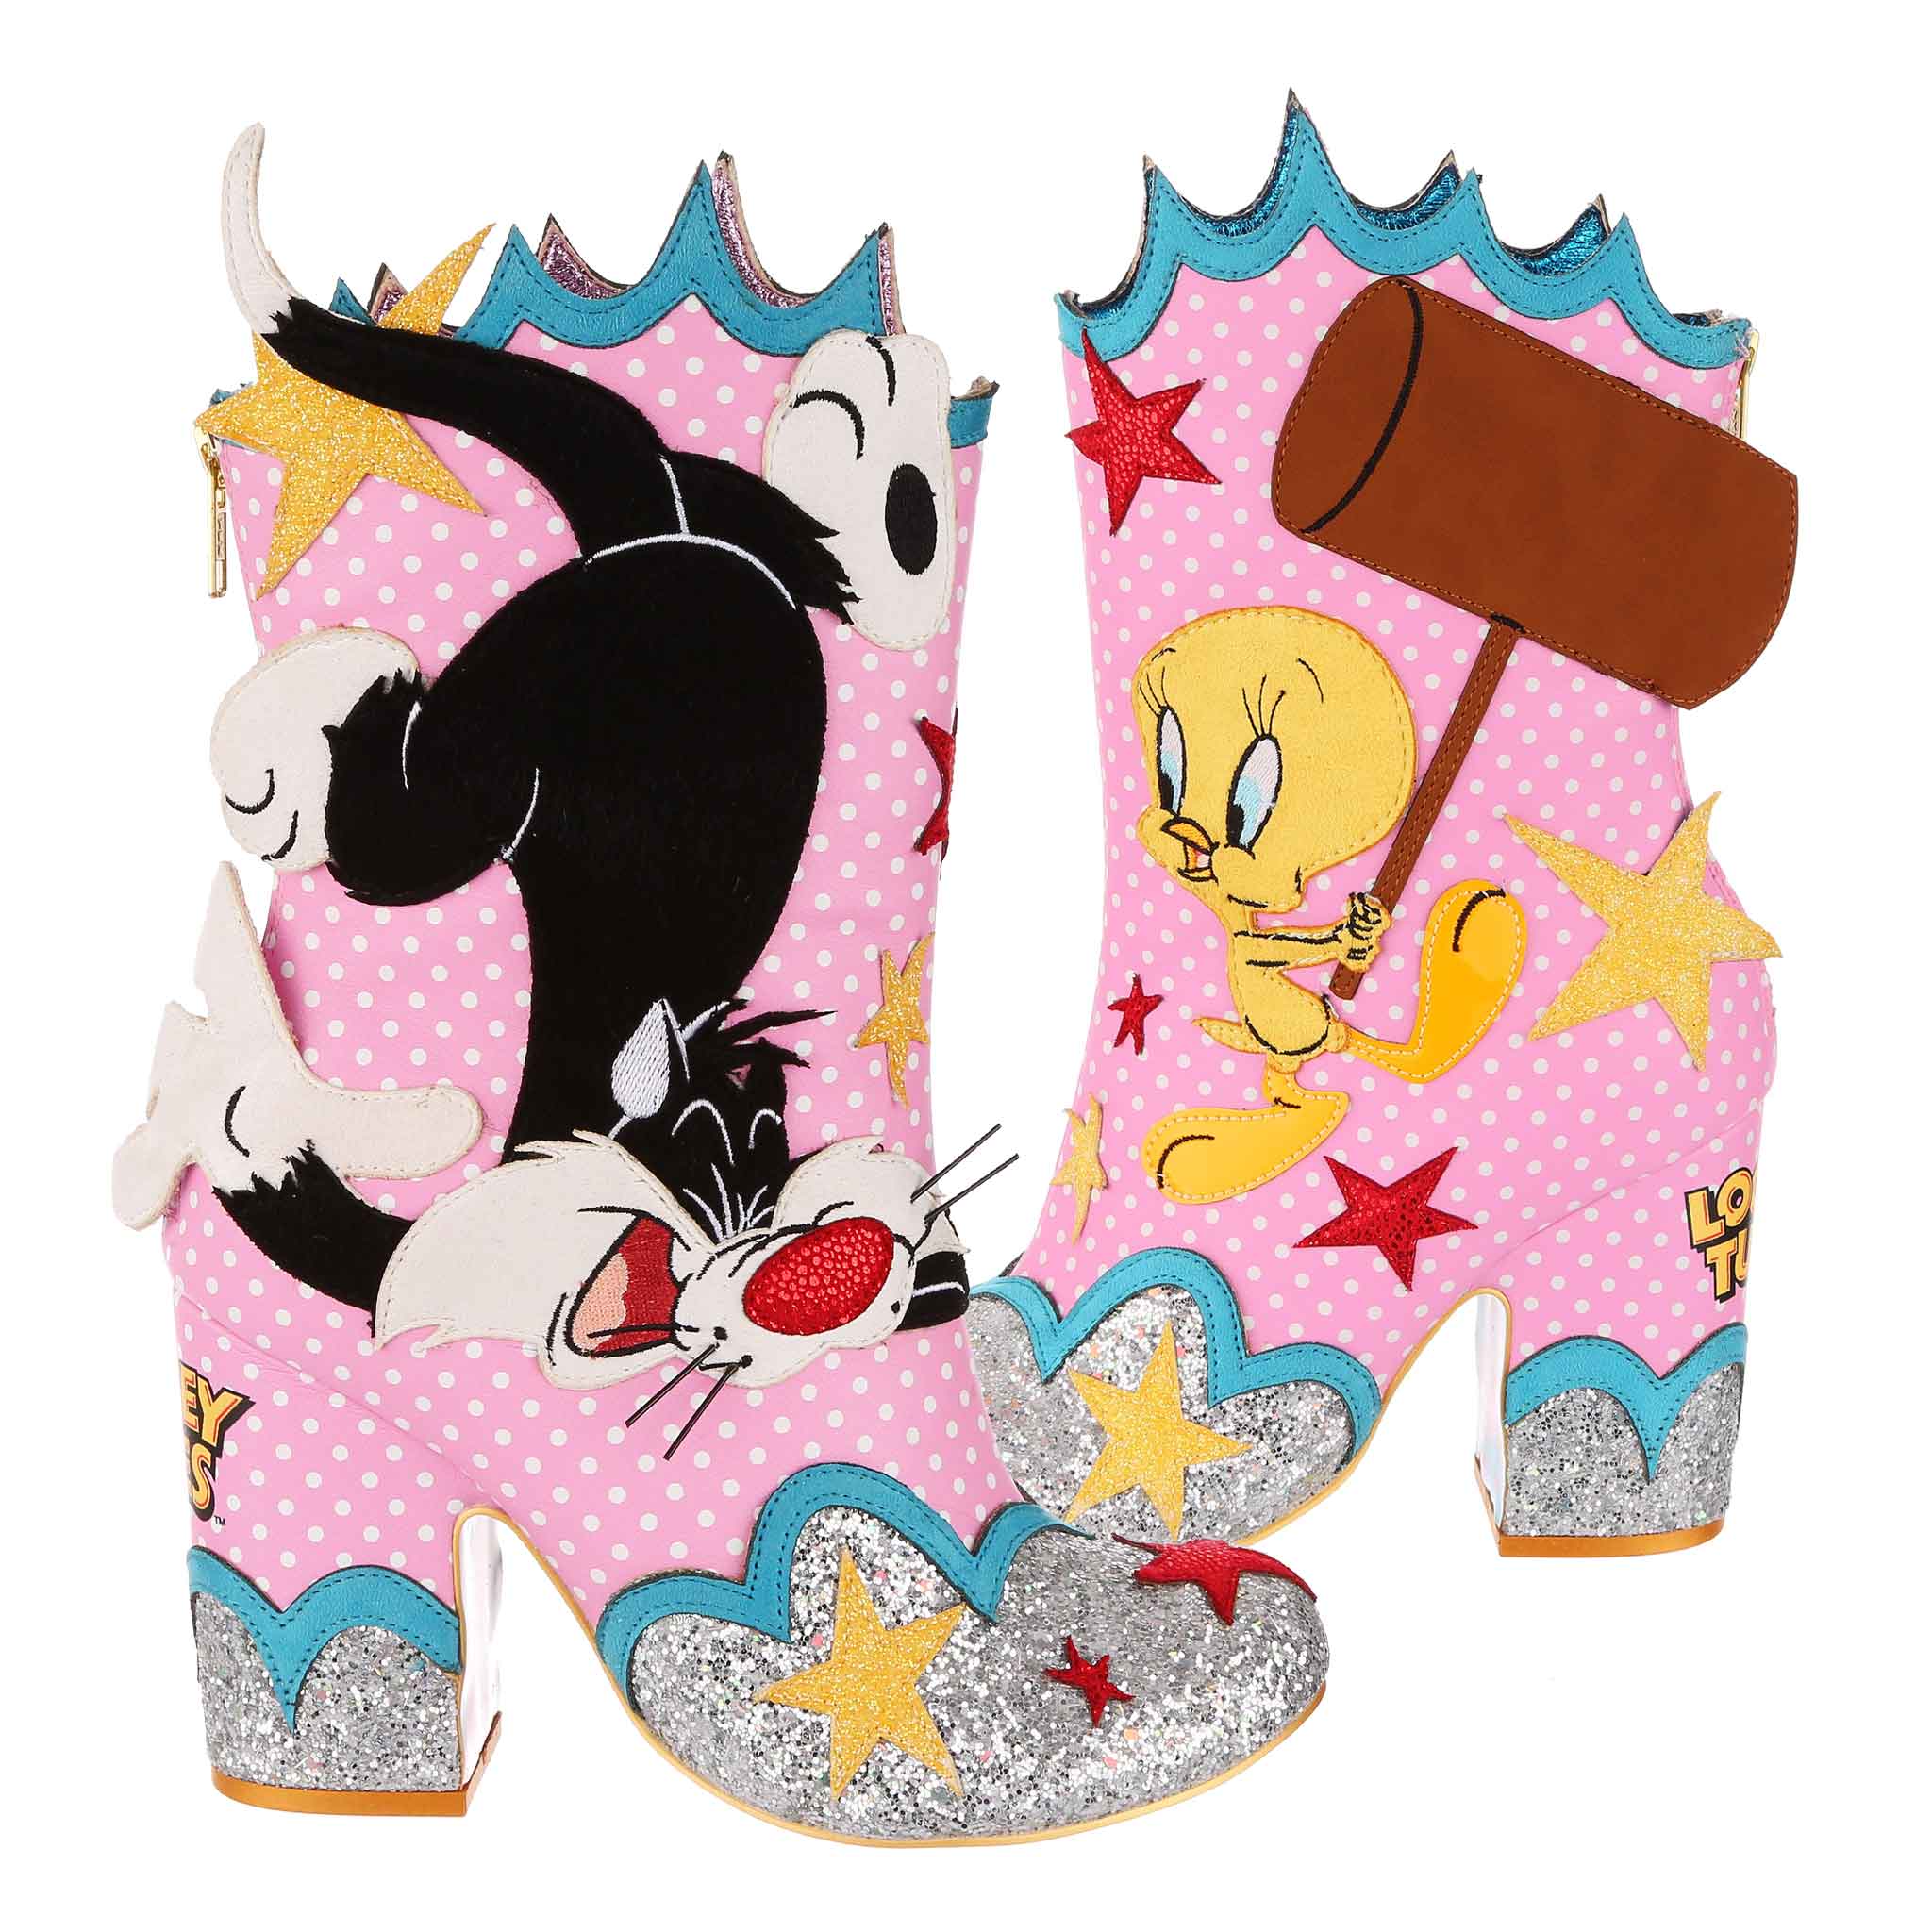 Calf high pink polka dot boots, with silver glitter toes and base of the heels, Tweety Bird is on the left foot with a large mallet, Sylvester the Cat is on the right foot looking like he has just been hit on the head, they are both surrounded by yellow and red stars.